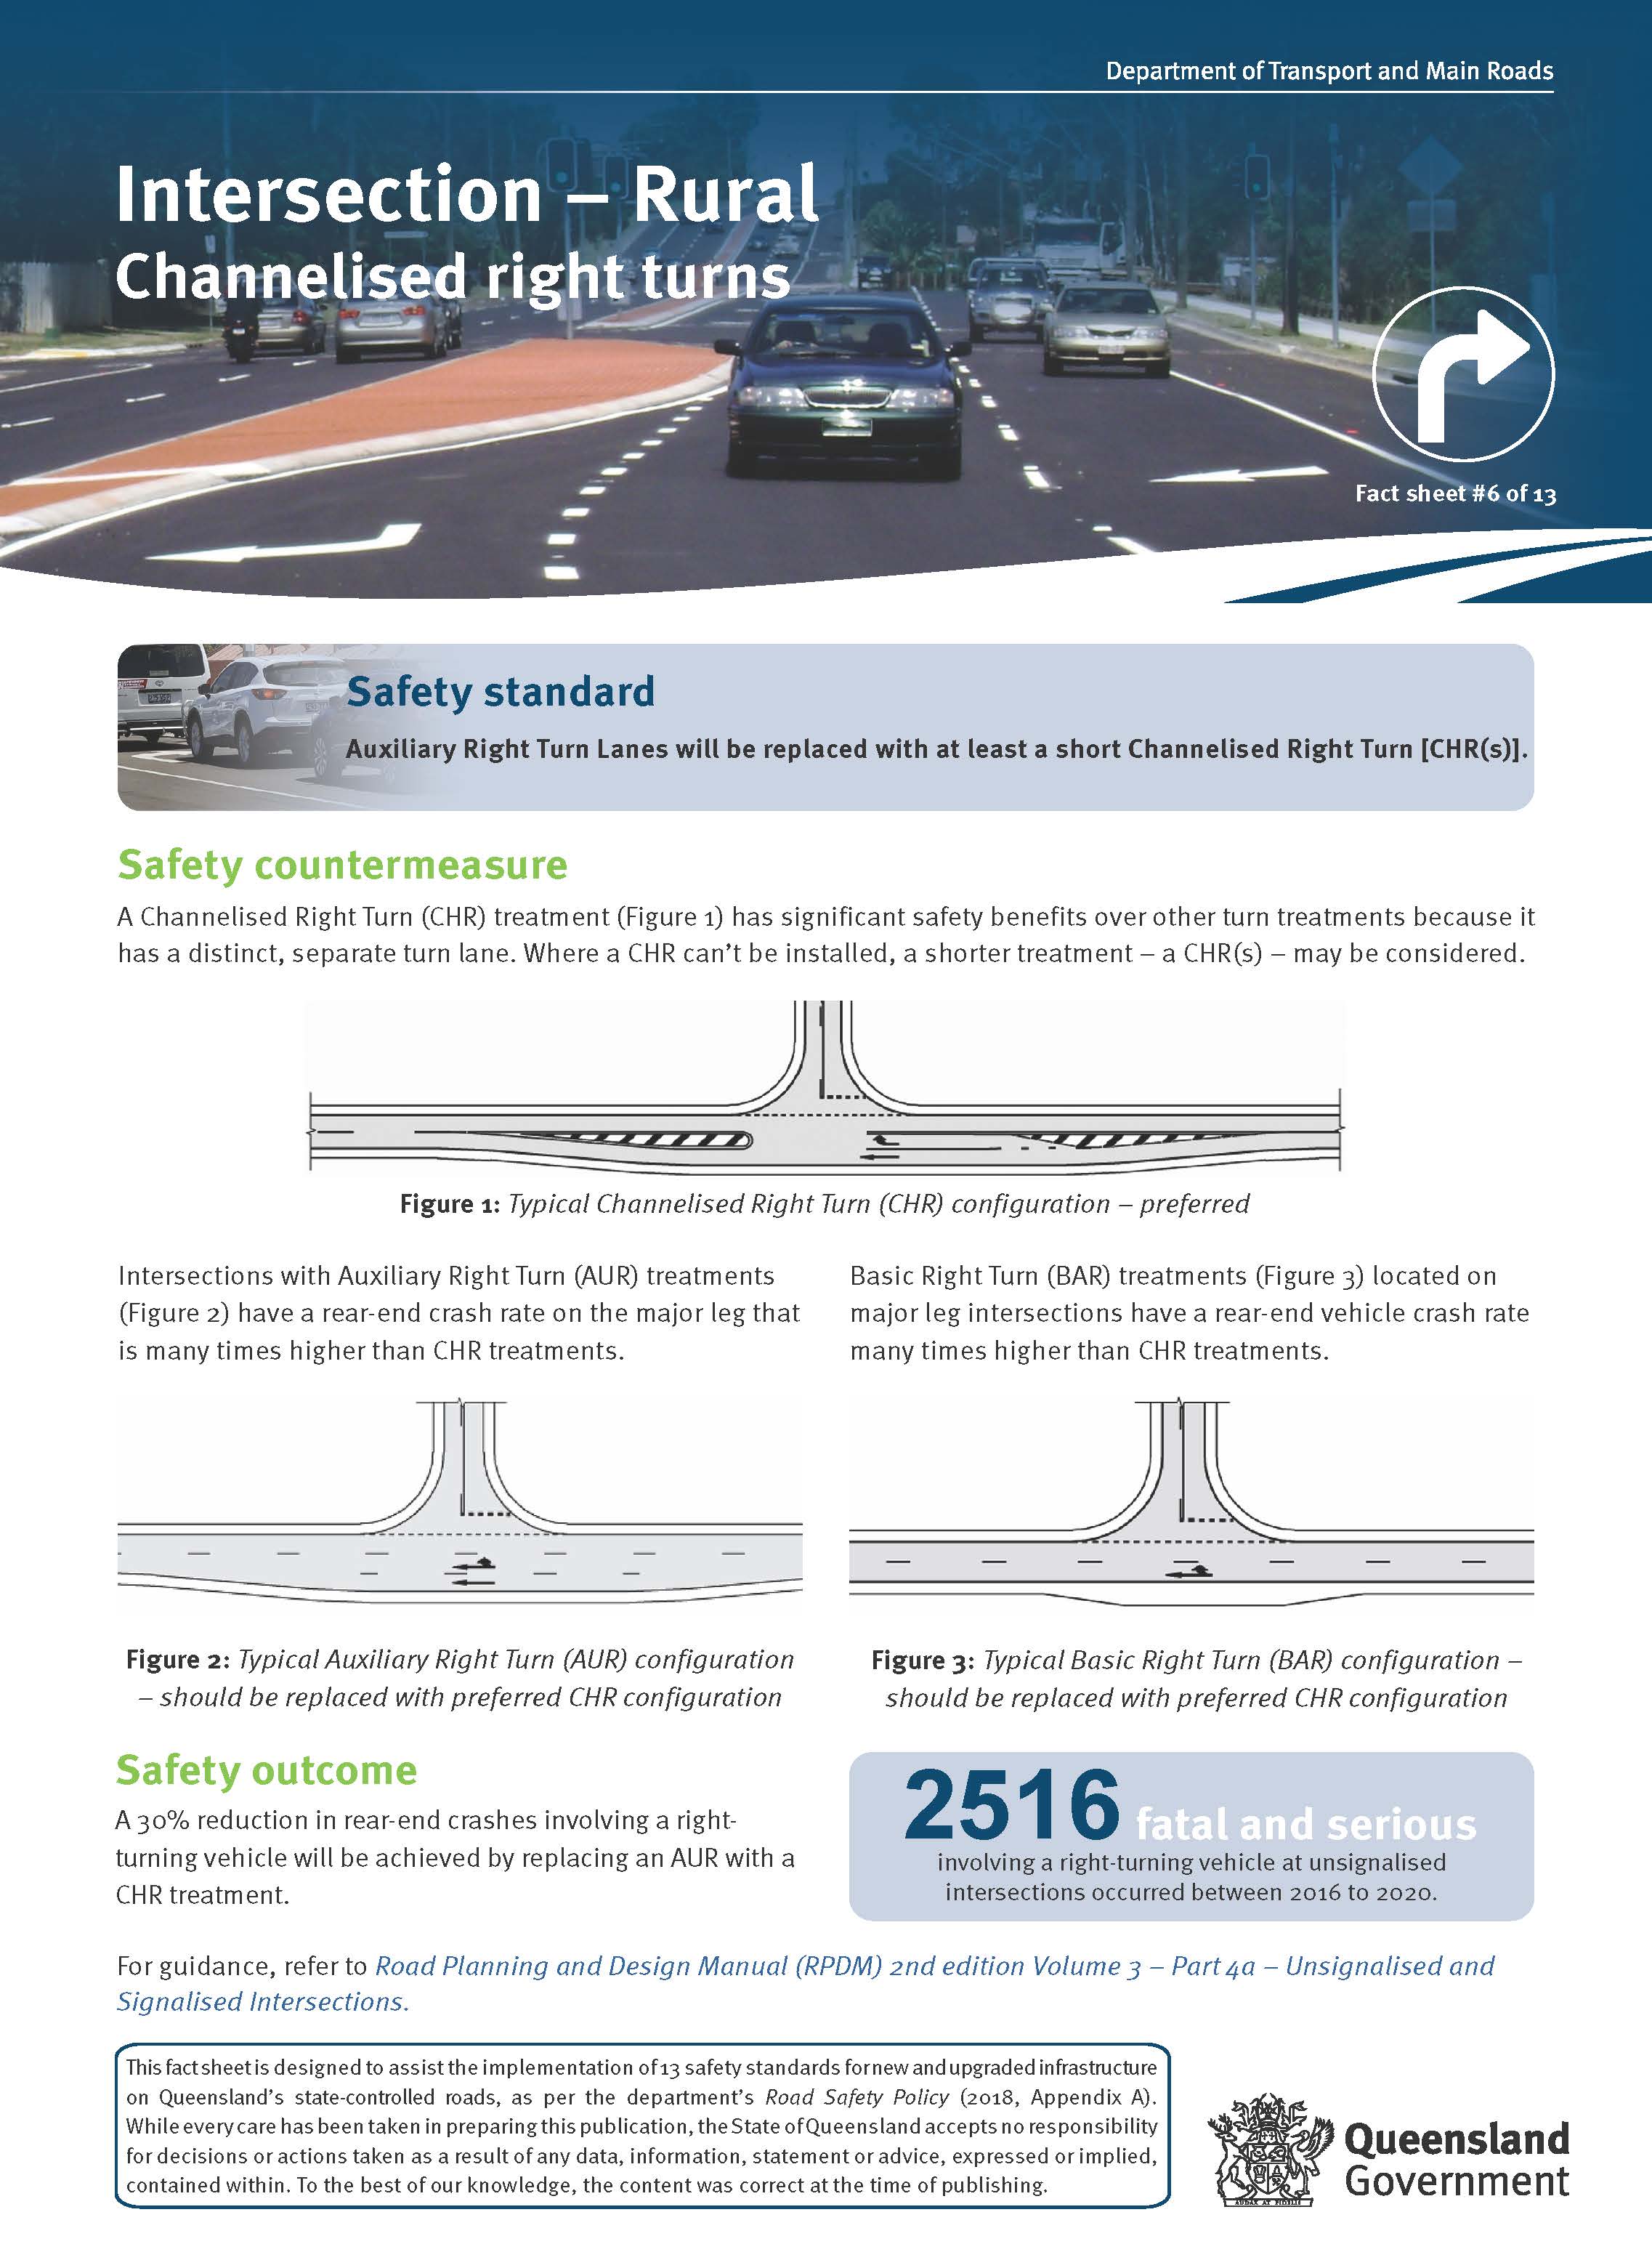 RSP Fact Sheet_06_Intersection - Rural - Channelised Right Turns